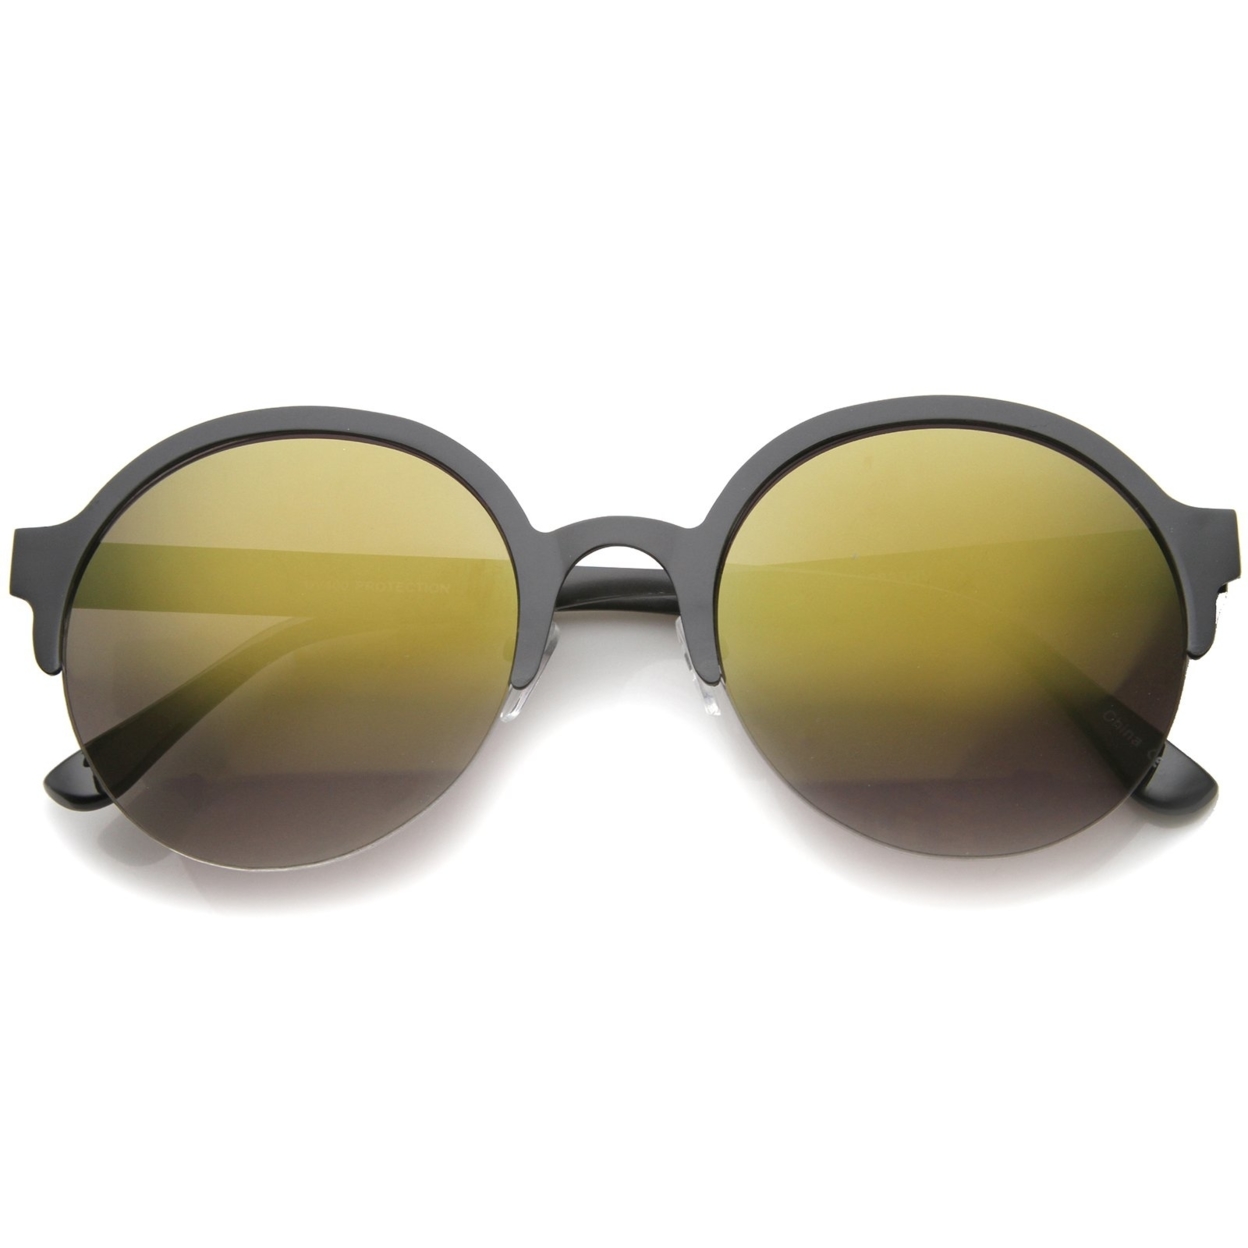 Modern Metal Half-Frame Color Mirrored Lens Round Sunglasses 55mm - Gold / Green Mirror